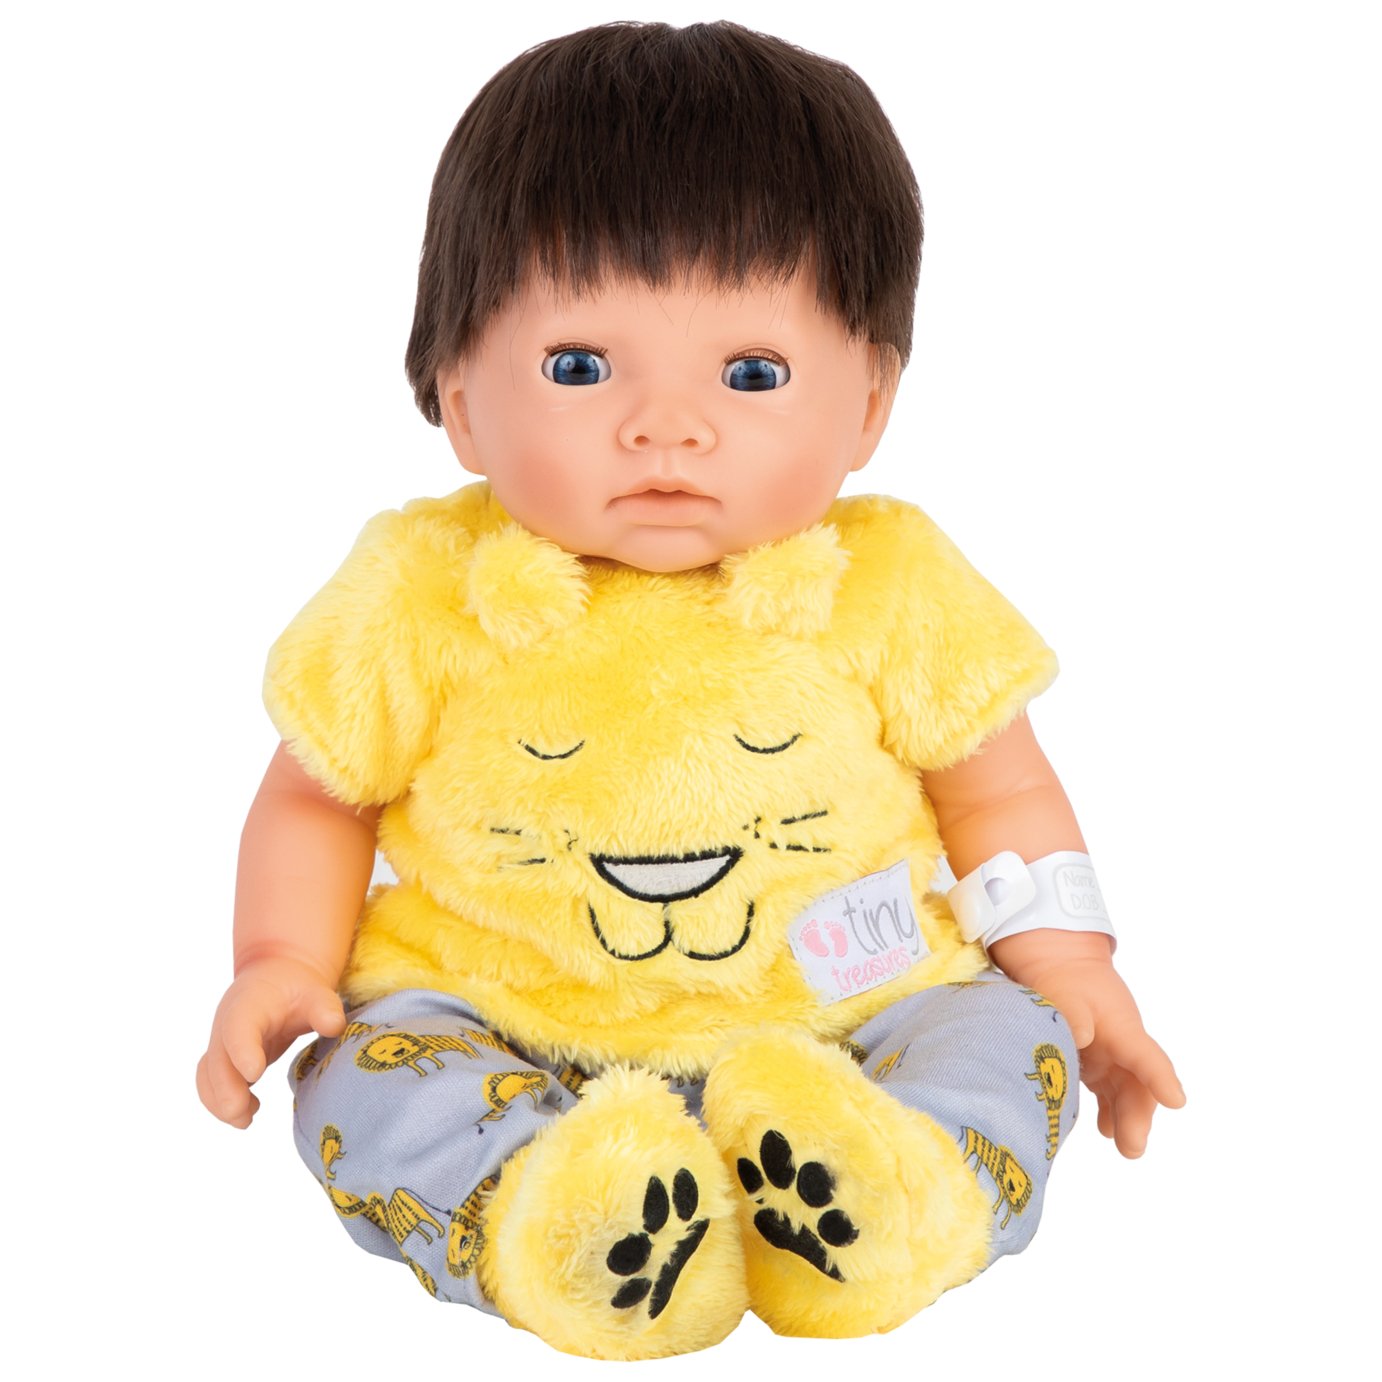 Tiny Treasures Little Lion Outfit Review